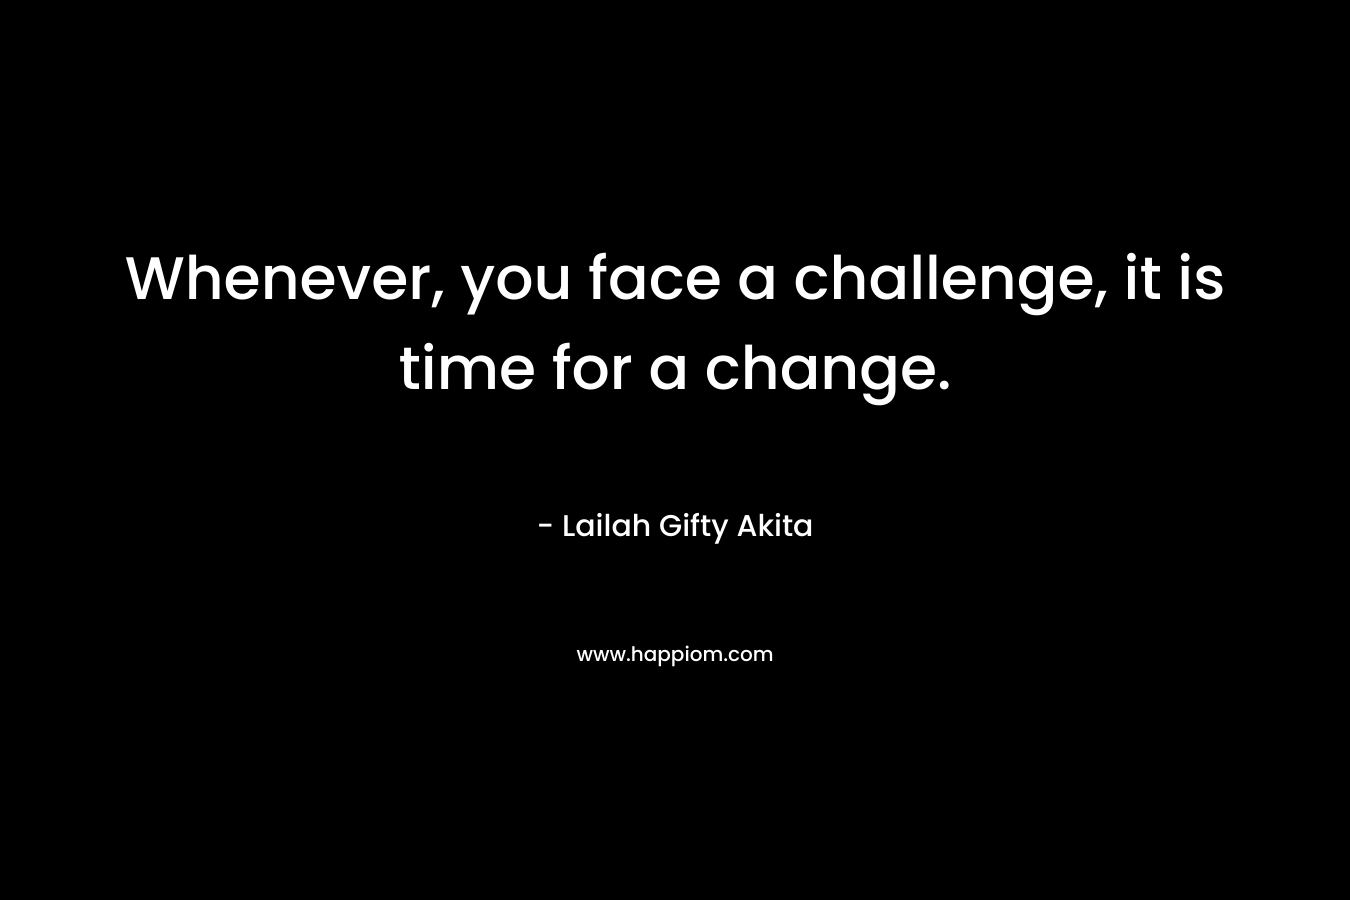 Whenever, you face a challenge, it is time for a change.